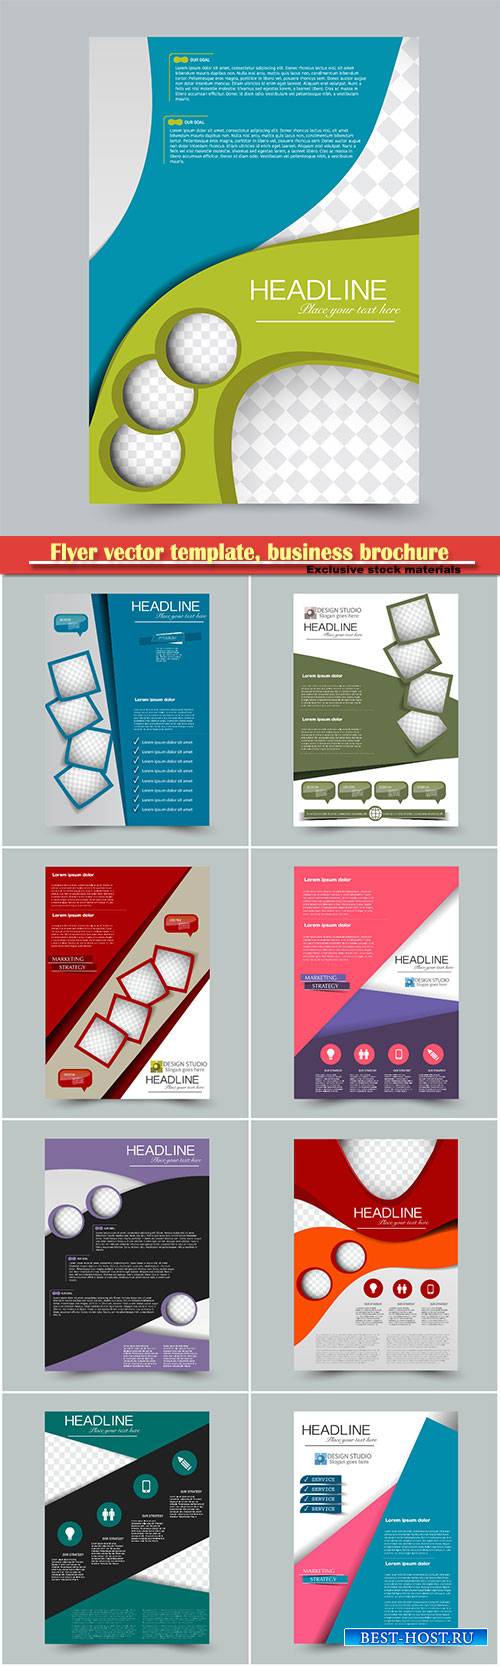 Flyer vector template, business brochure, magazine cover # 4